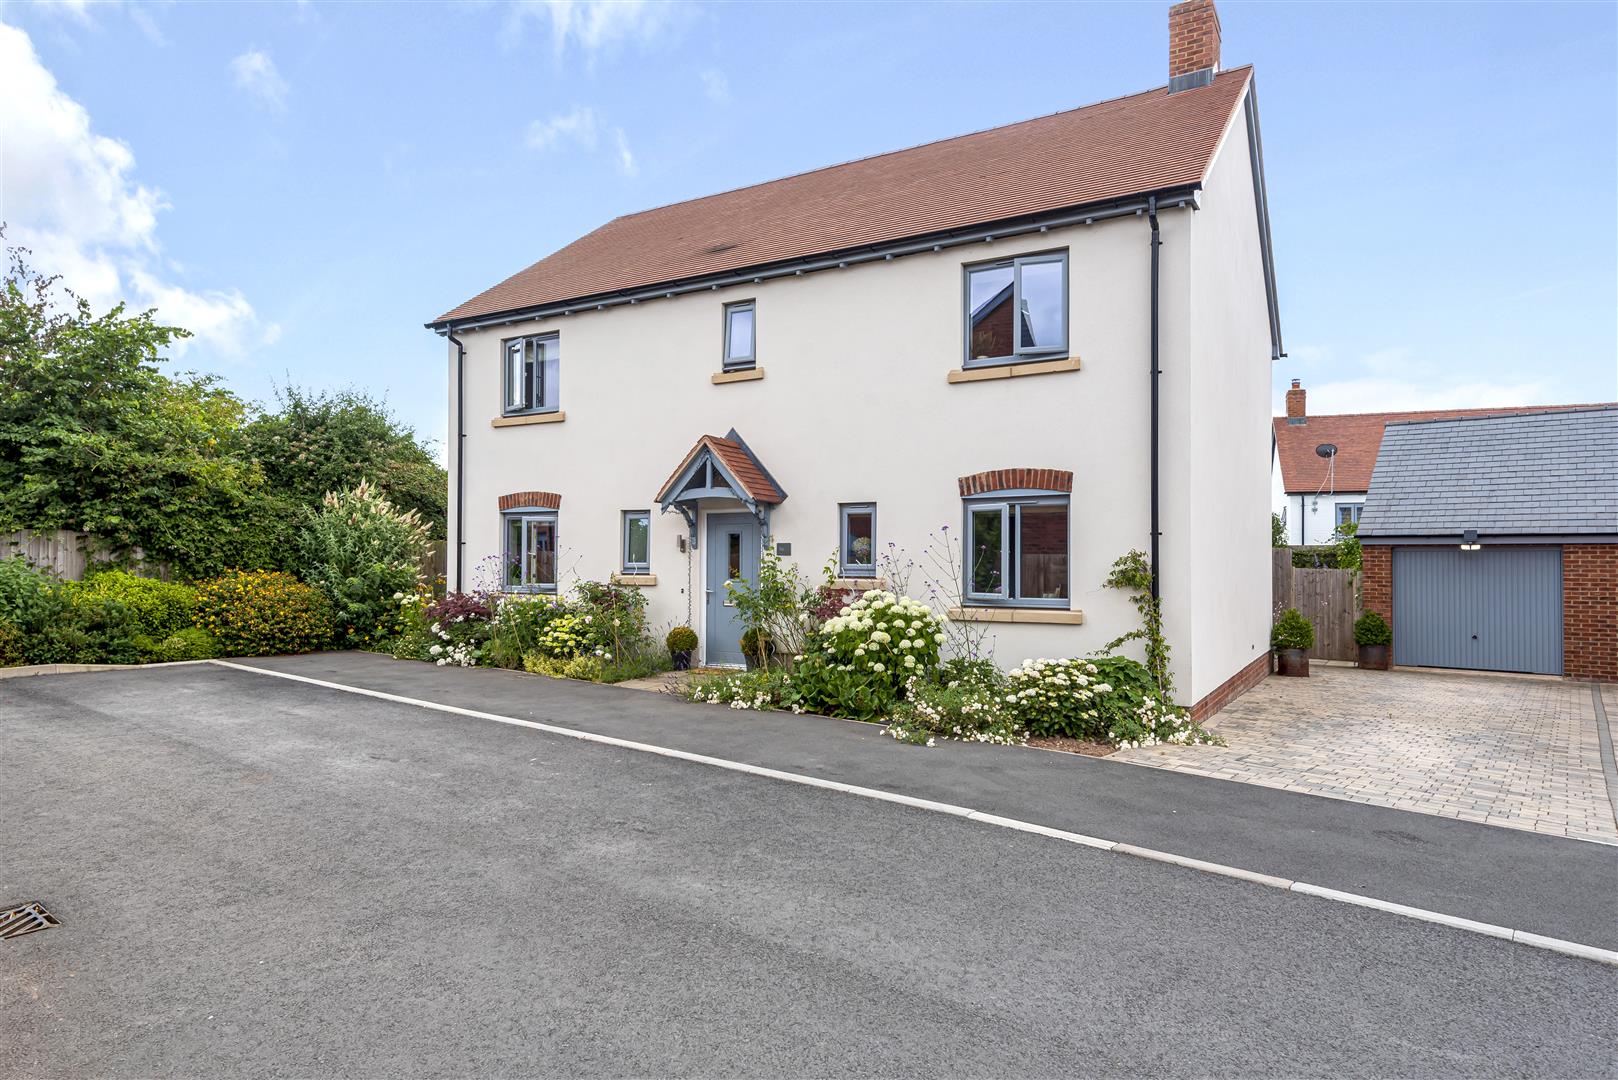 4 bed detached for sale in Weobley, HR4